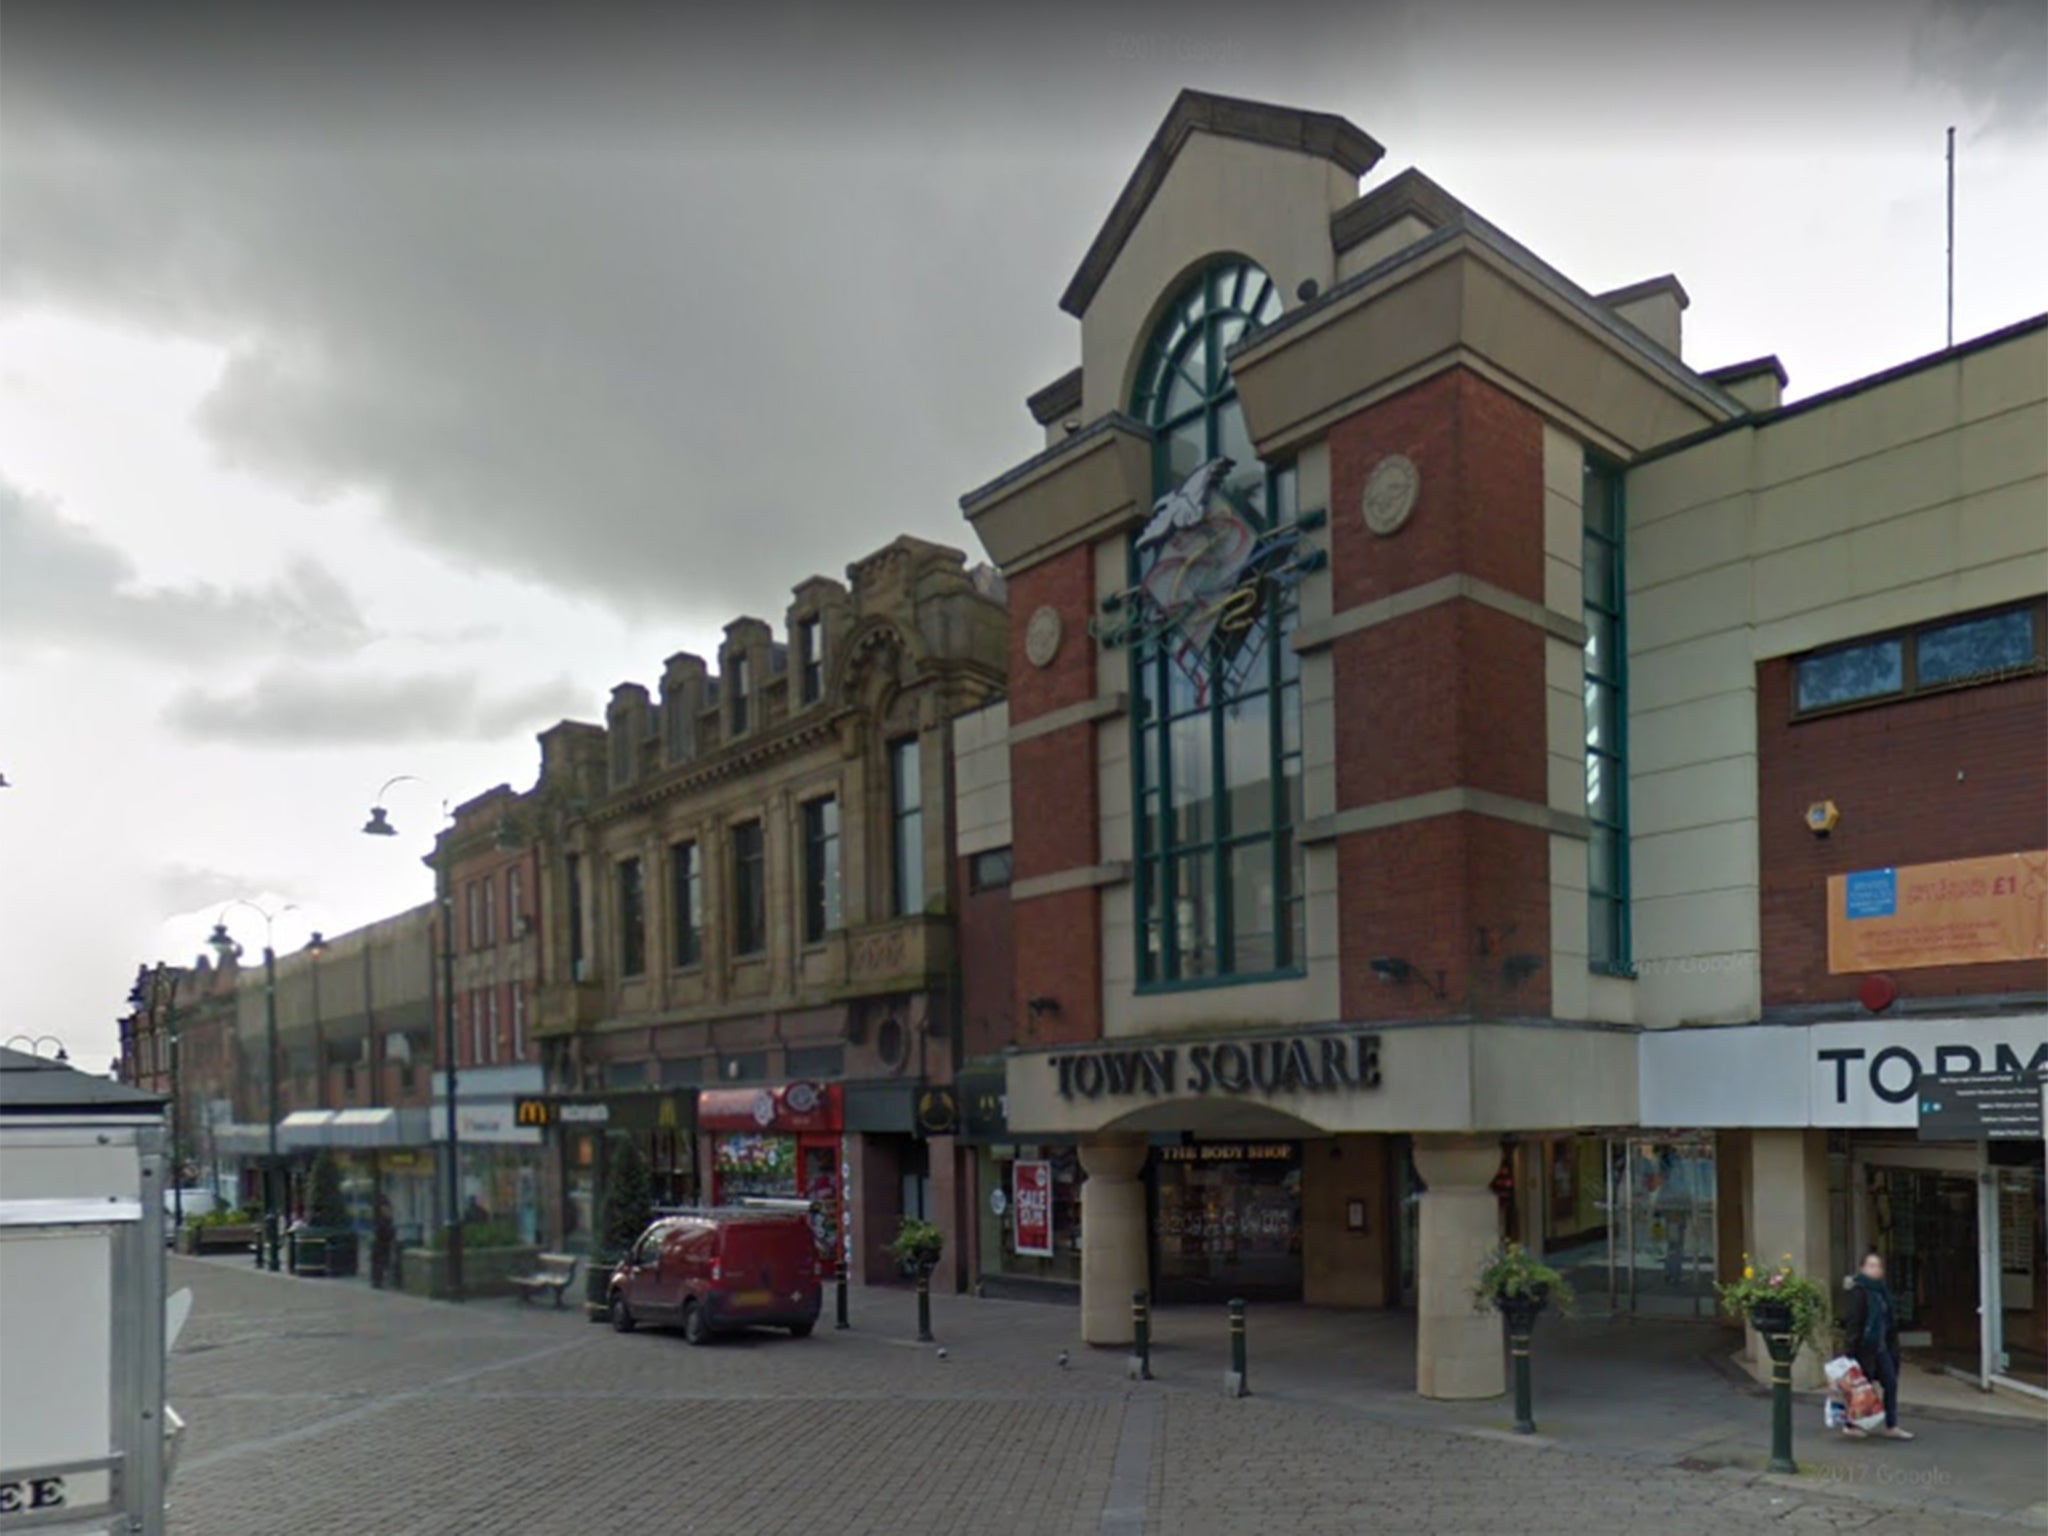 The initial robbery took place at the Town Square Shopping Centre in Oldham